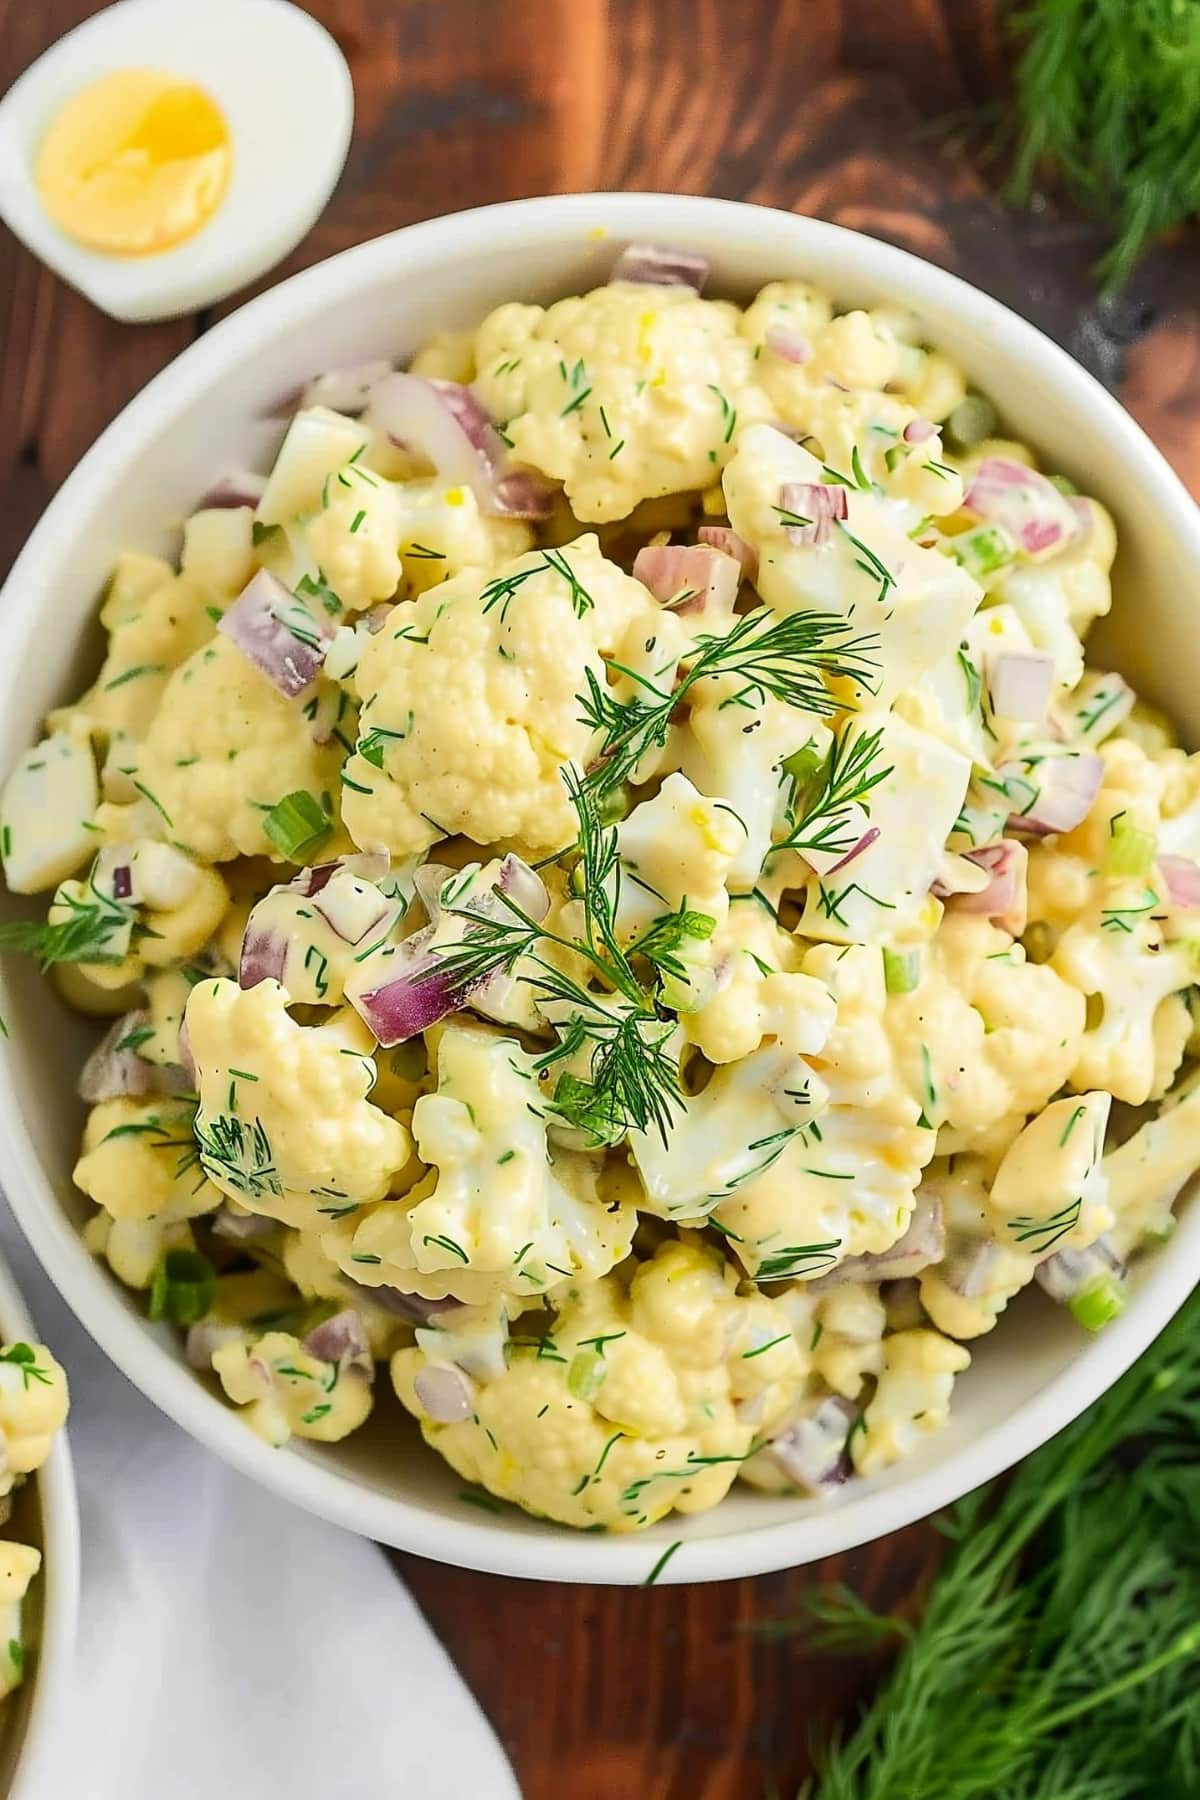 Creamy homemade cauliflower potato salad with red onions, dill and hard boiled eggs